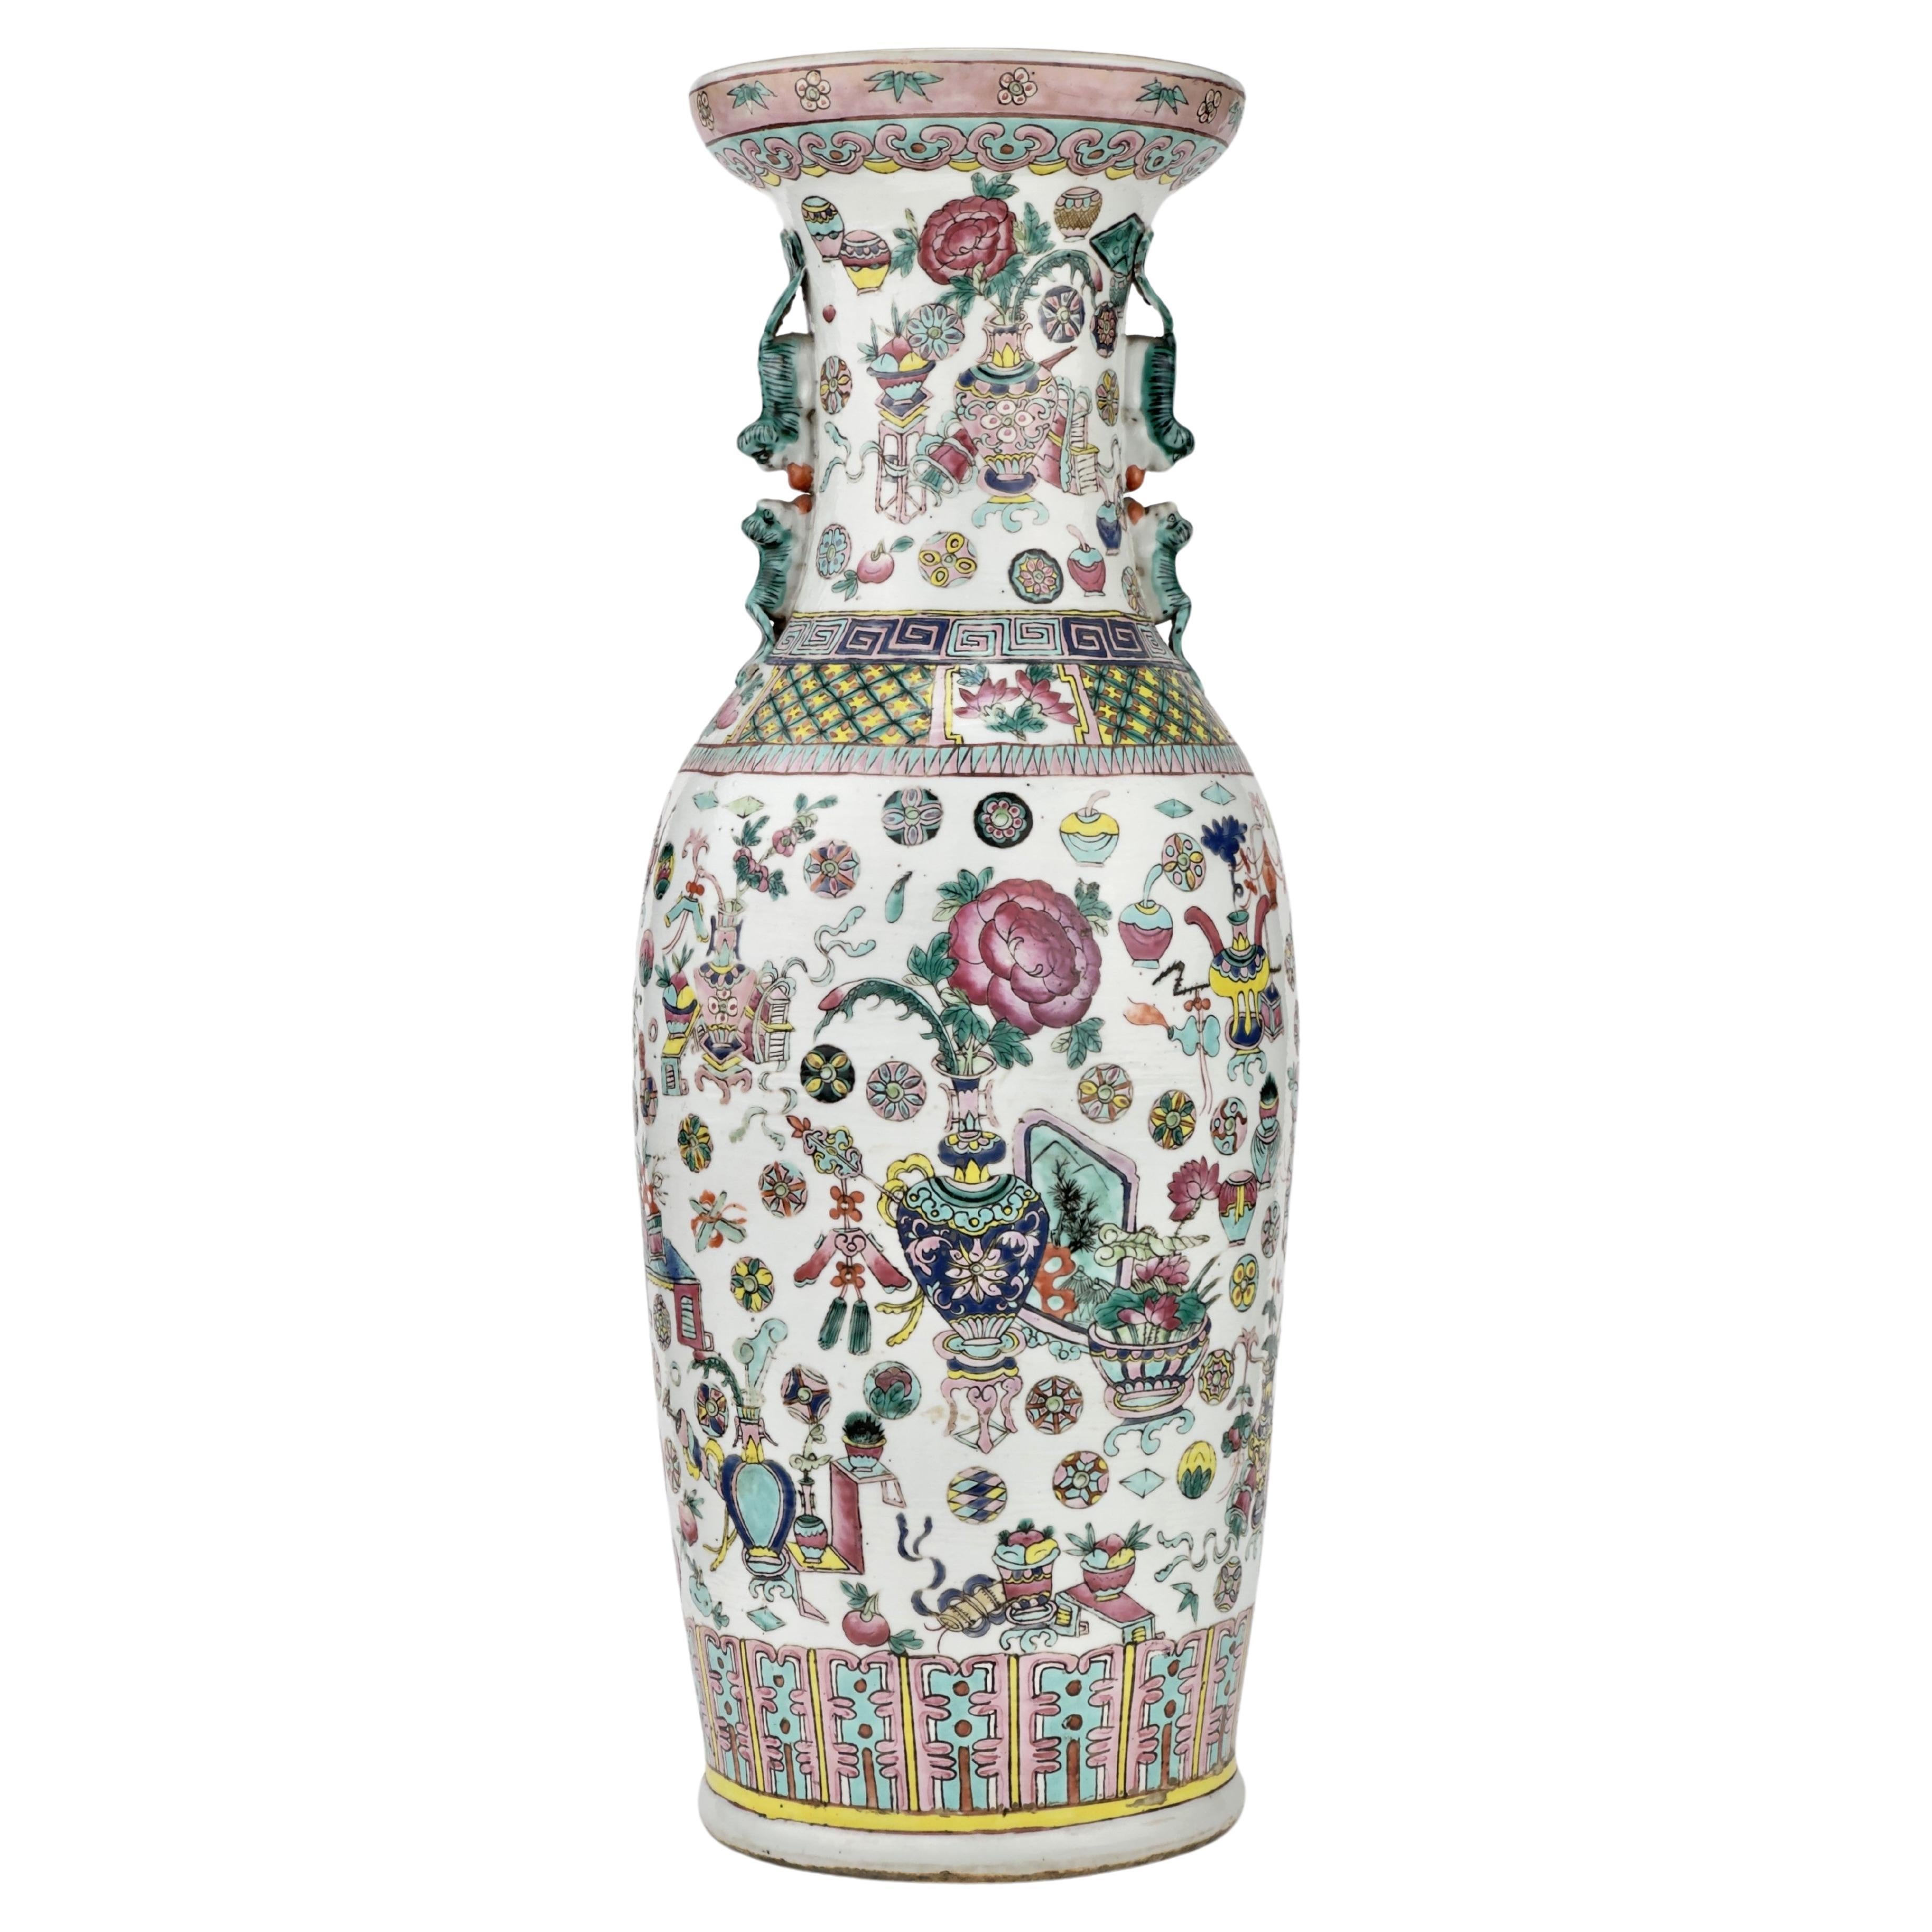 A Large Chinese Enameled Famille Rose Vase, Qing Period, 19th century